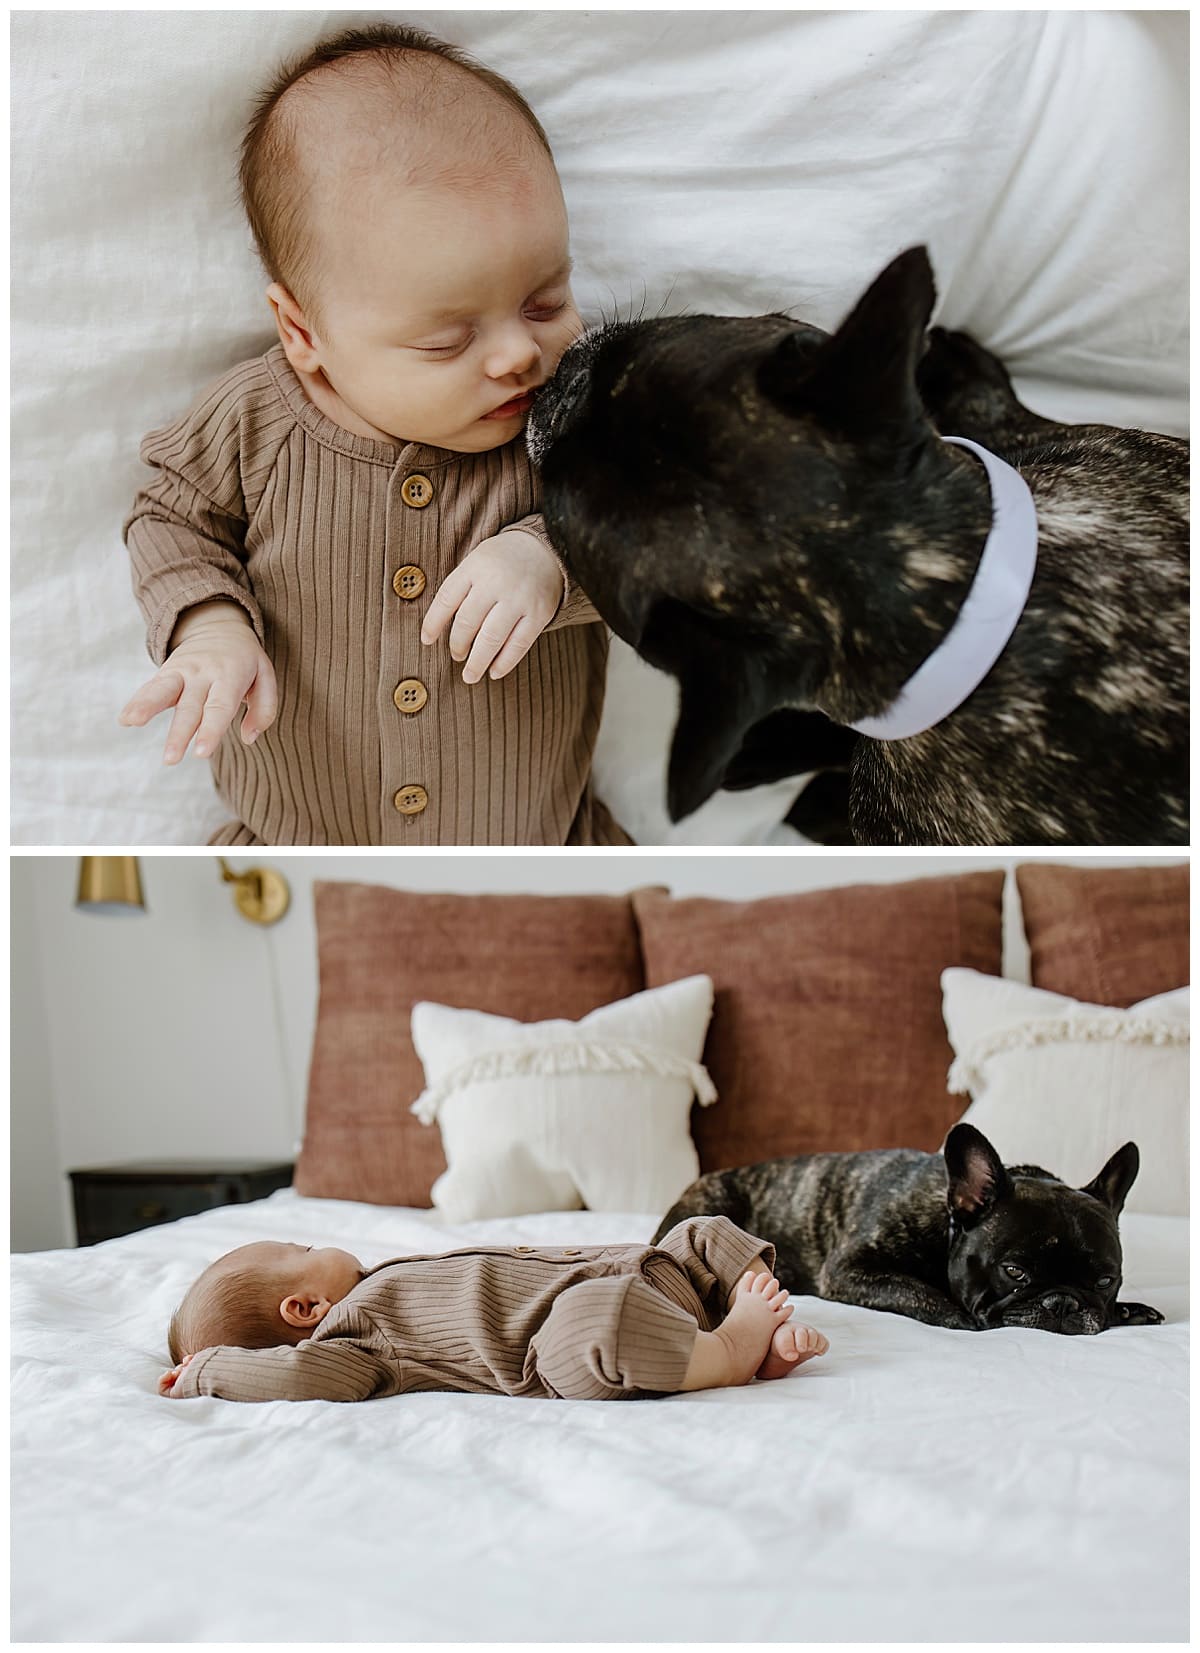 After Preparing For Your Newborn Storytelling Session dog and baby cuddle in close together 